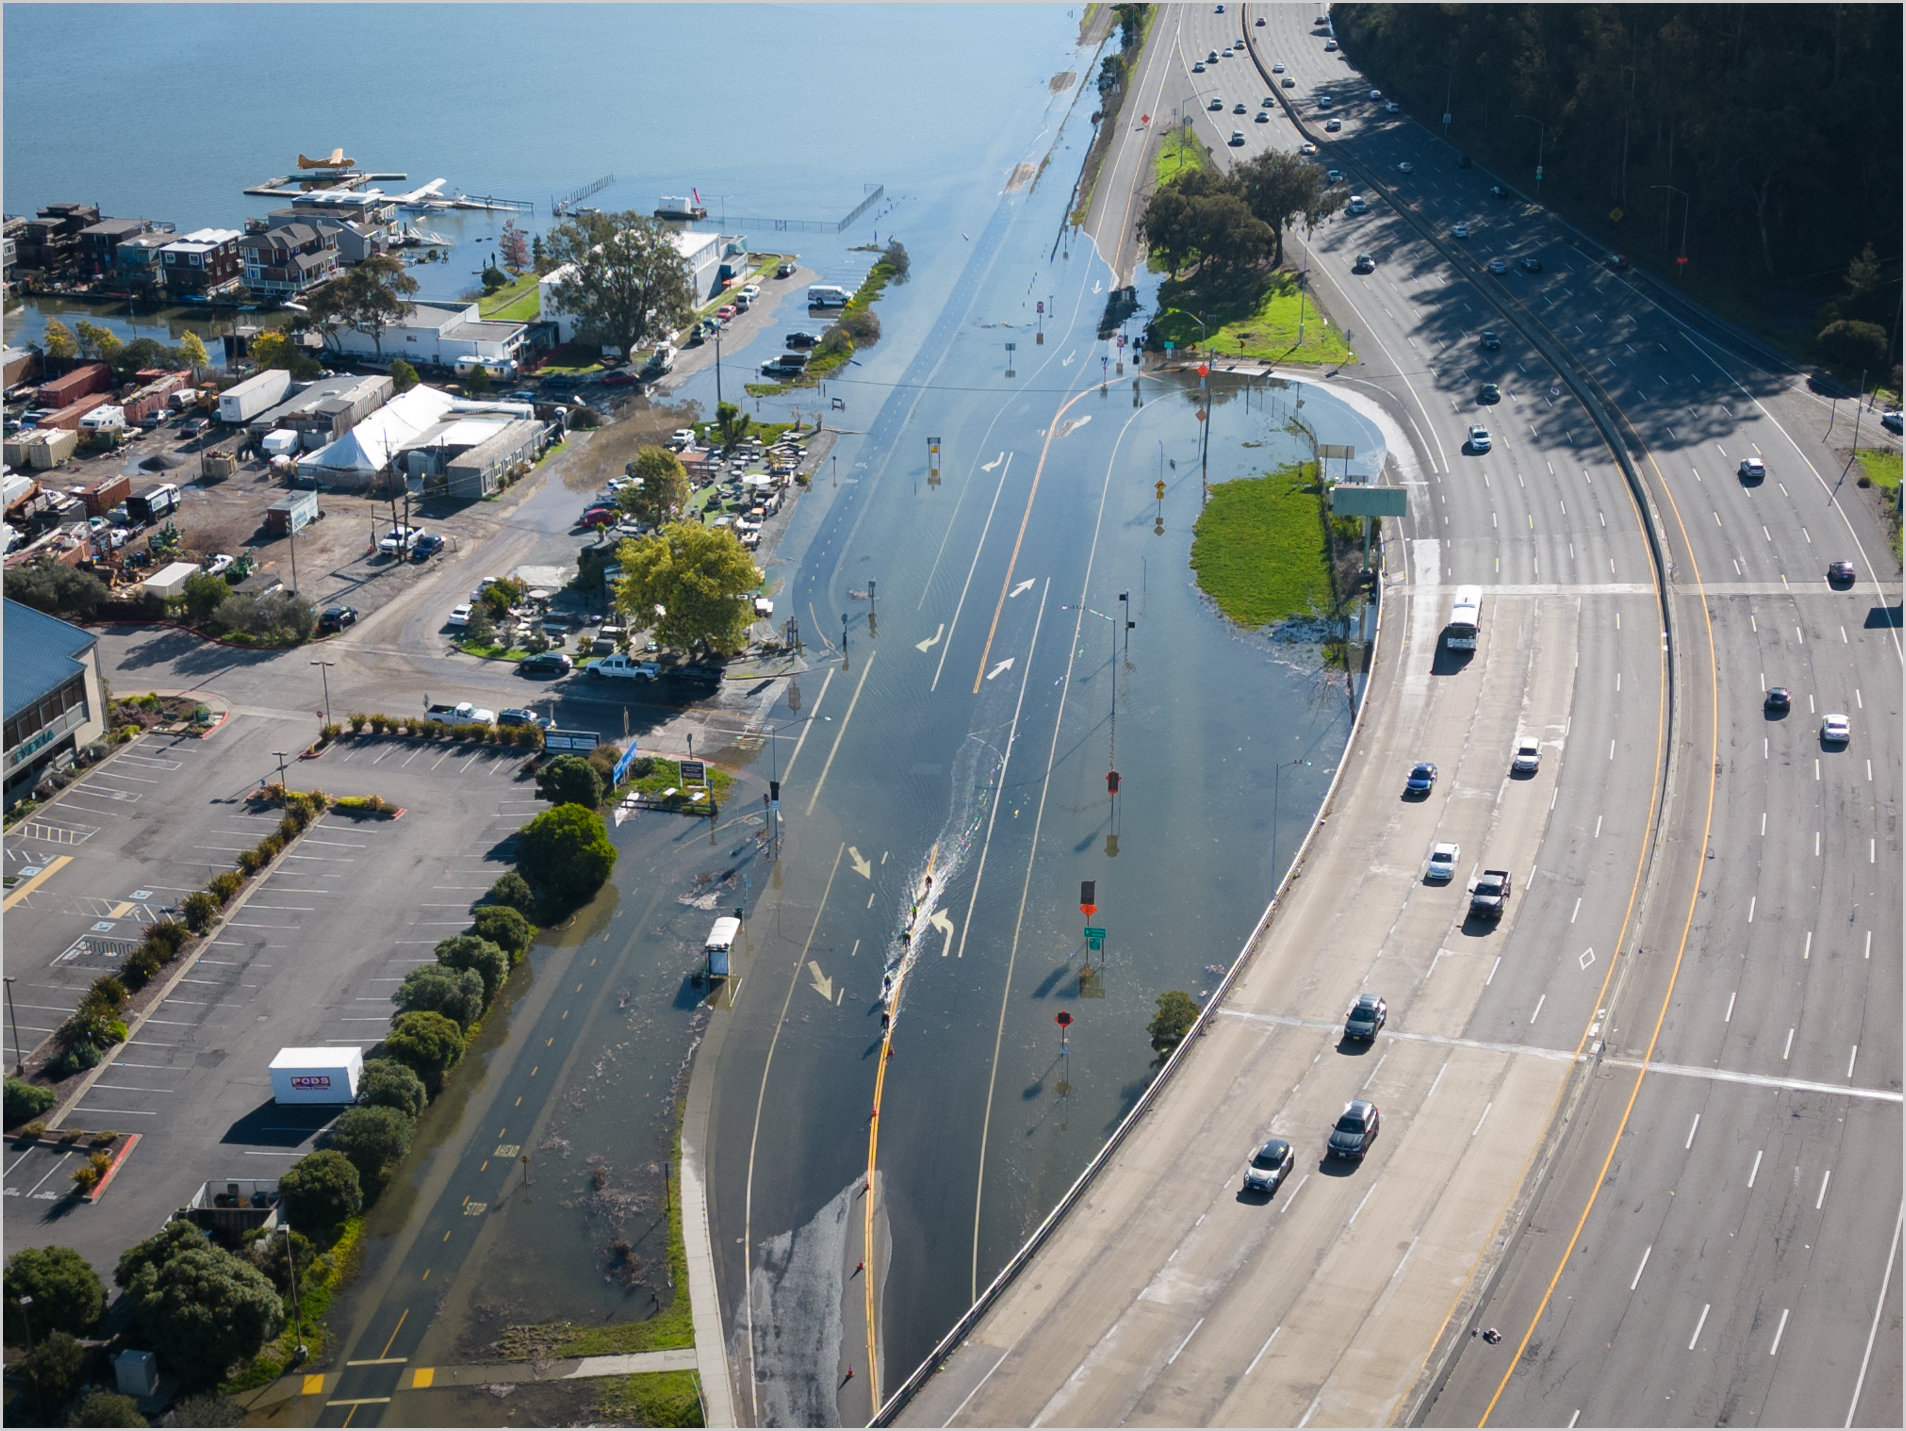 An unusually high tide, called a King Tide, floods a highway on-ramp in Northern California in January 2023. Sea level rise and El Niños can exacerbate this type of flooding. Credit: California King Tides Project
